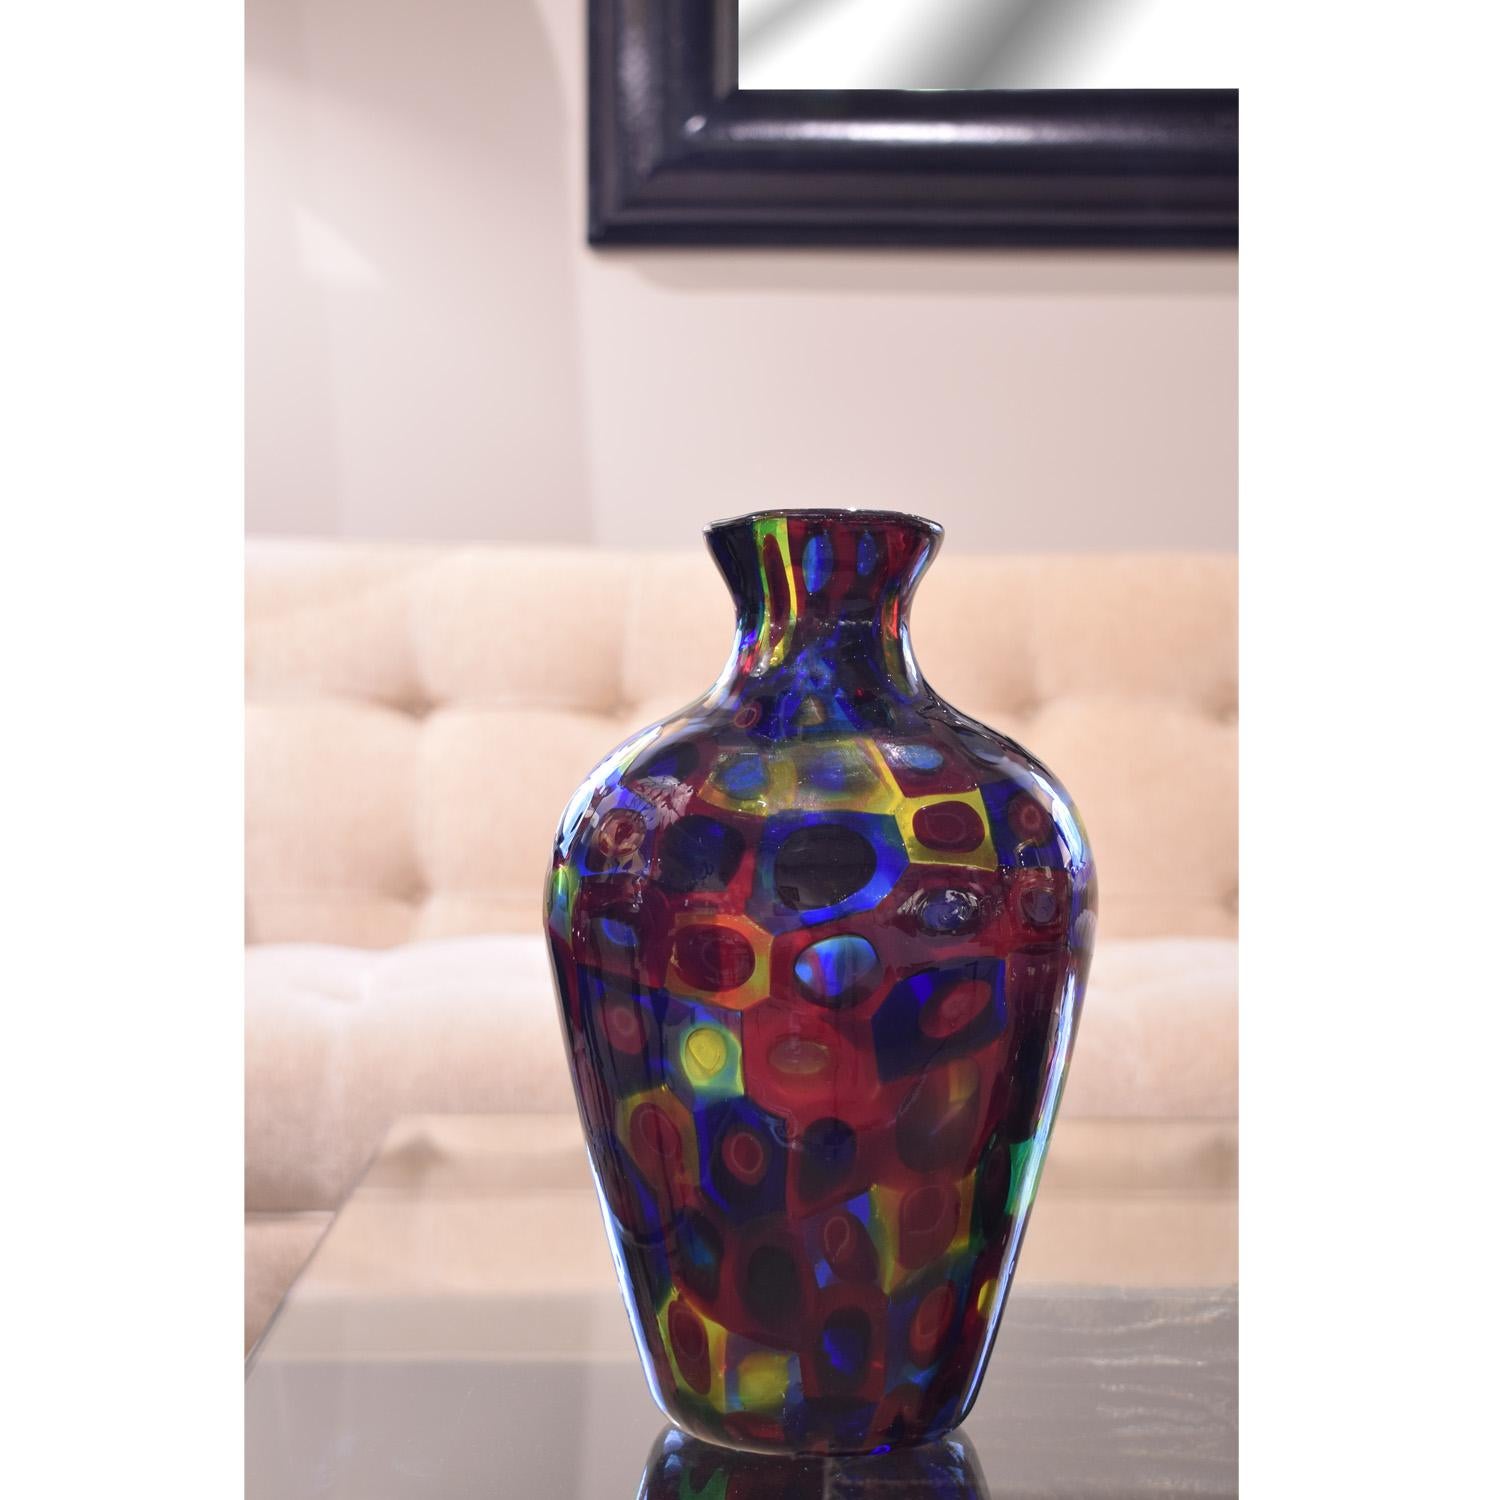 Glass Vase with Large Murrhines by Anzolo Fuga for A.V.E.M, 1956 In Excellent Condition For Sale In New York, NY